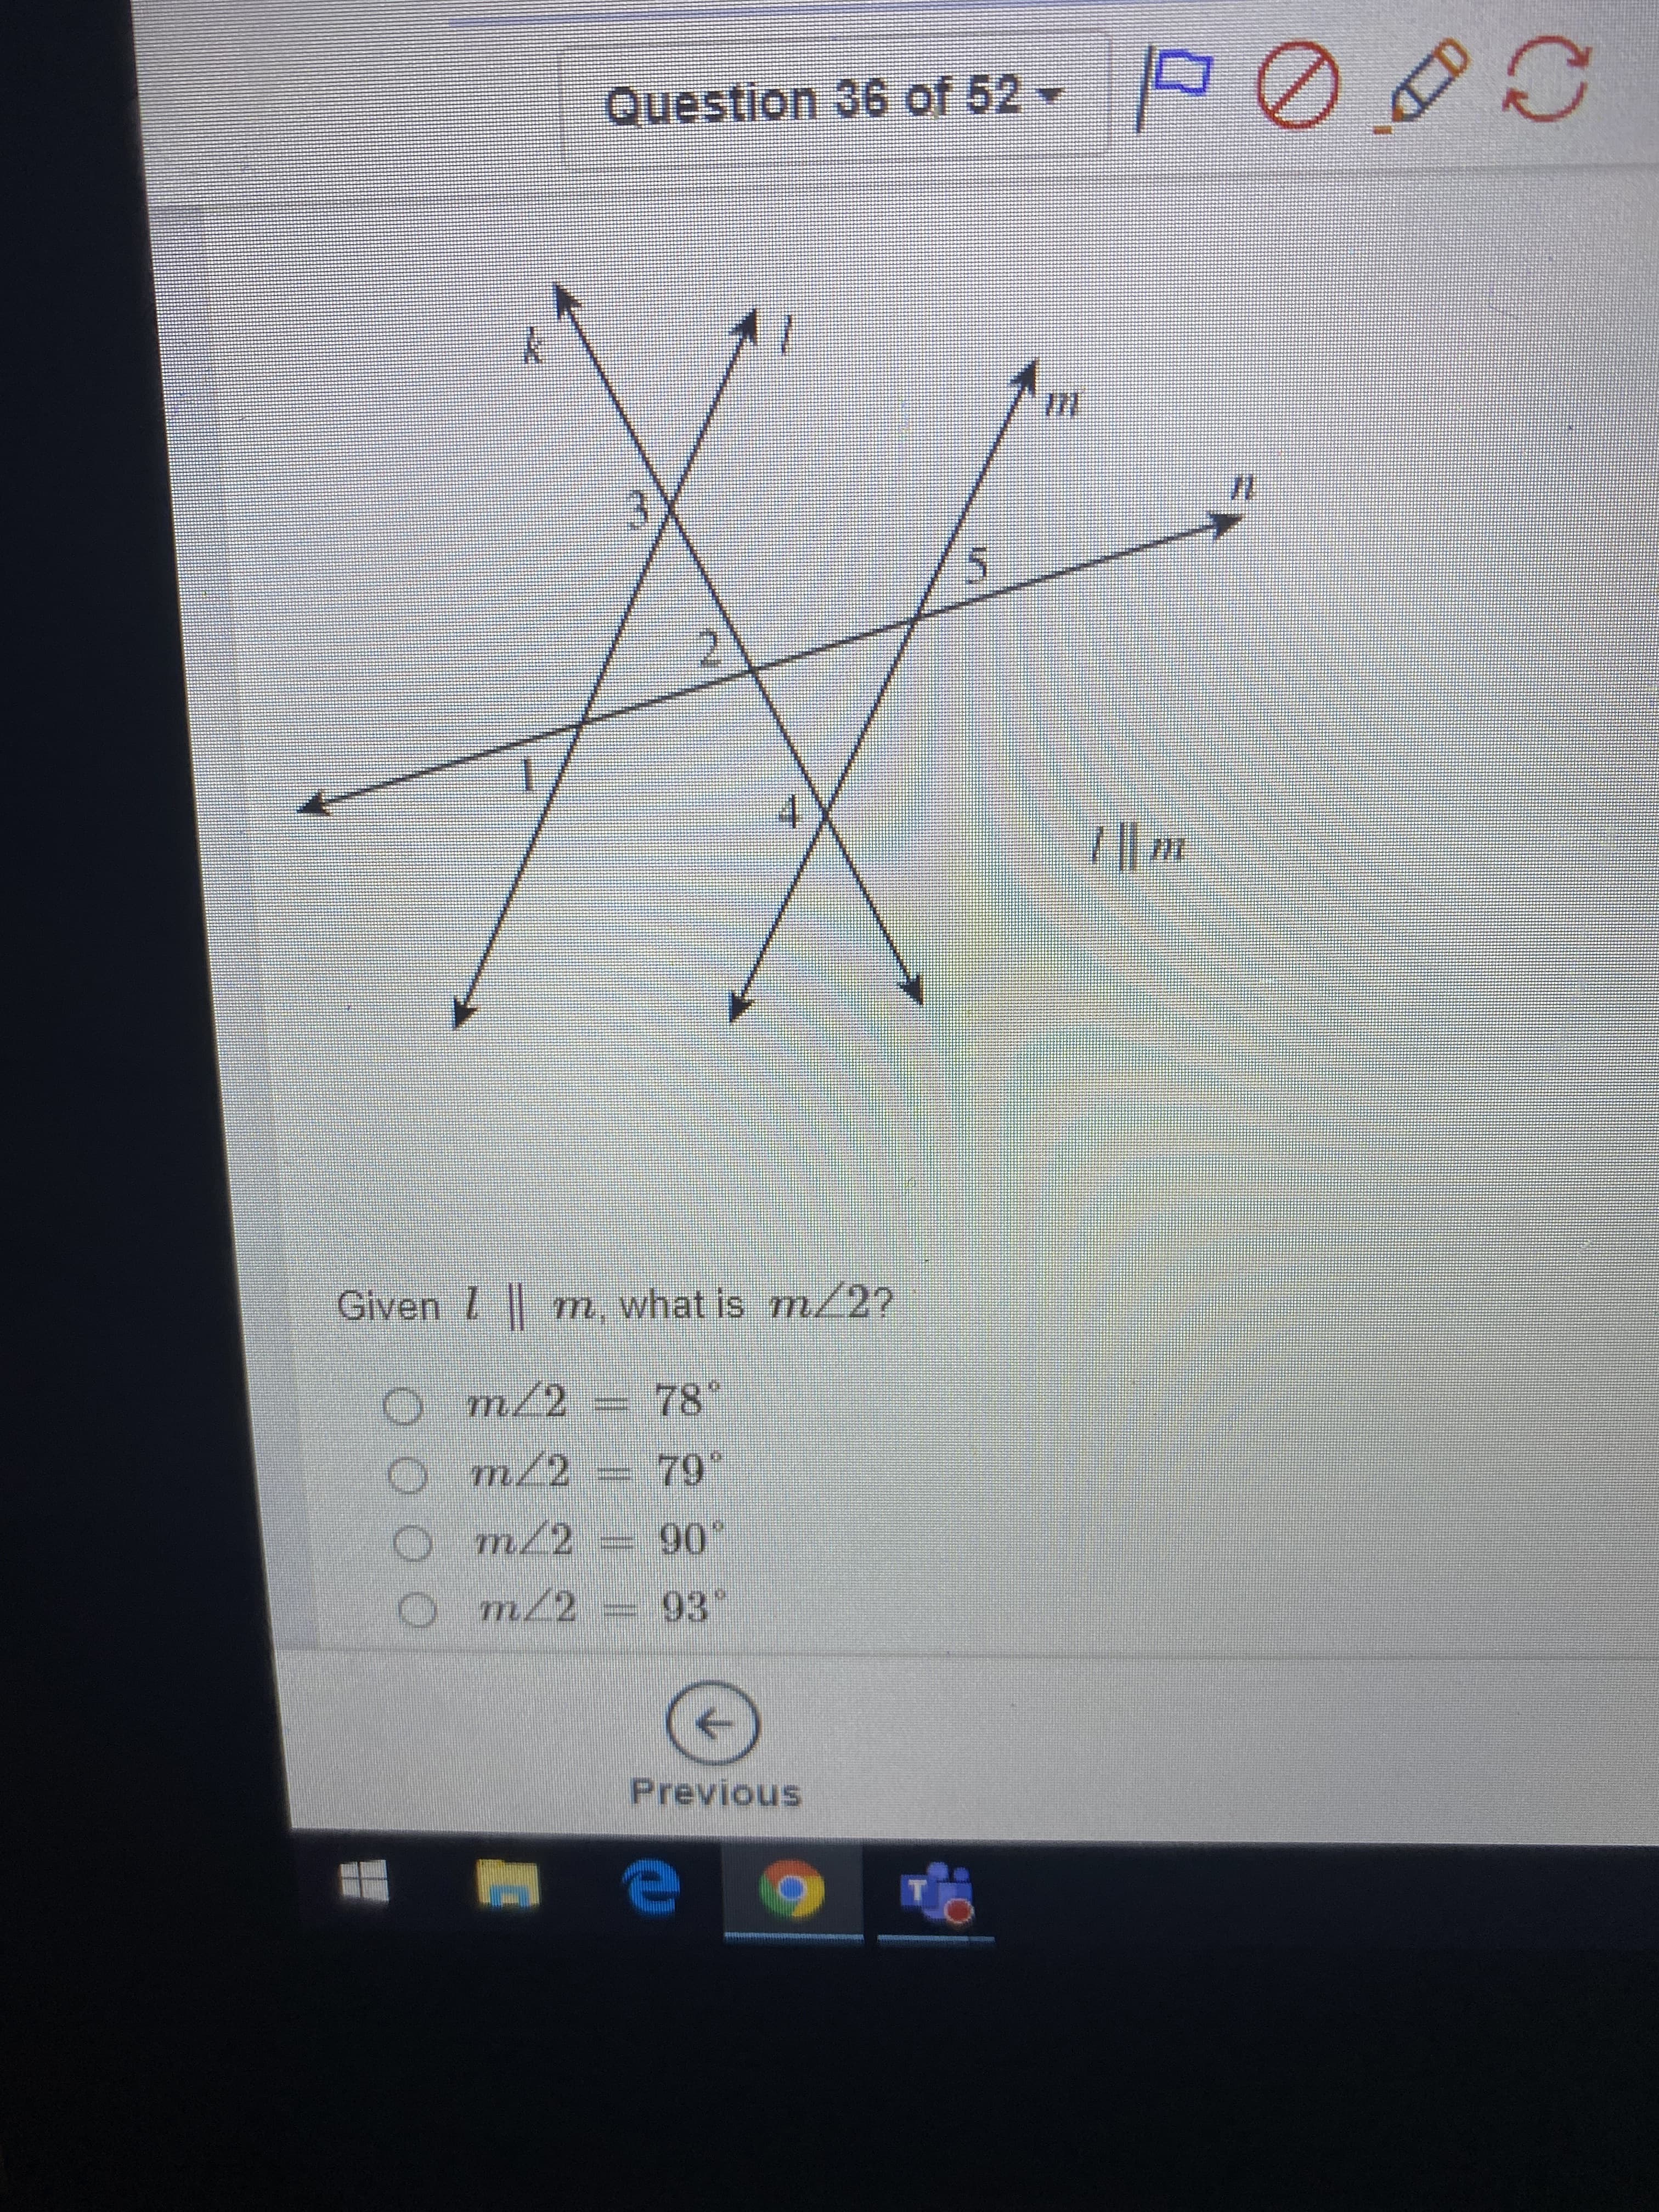 Given I m, what is m/2?
